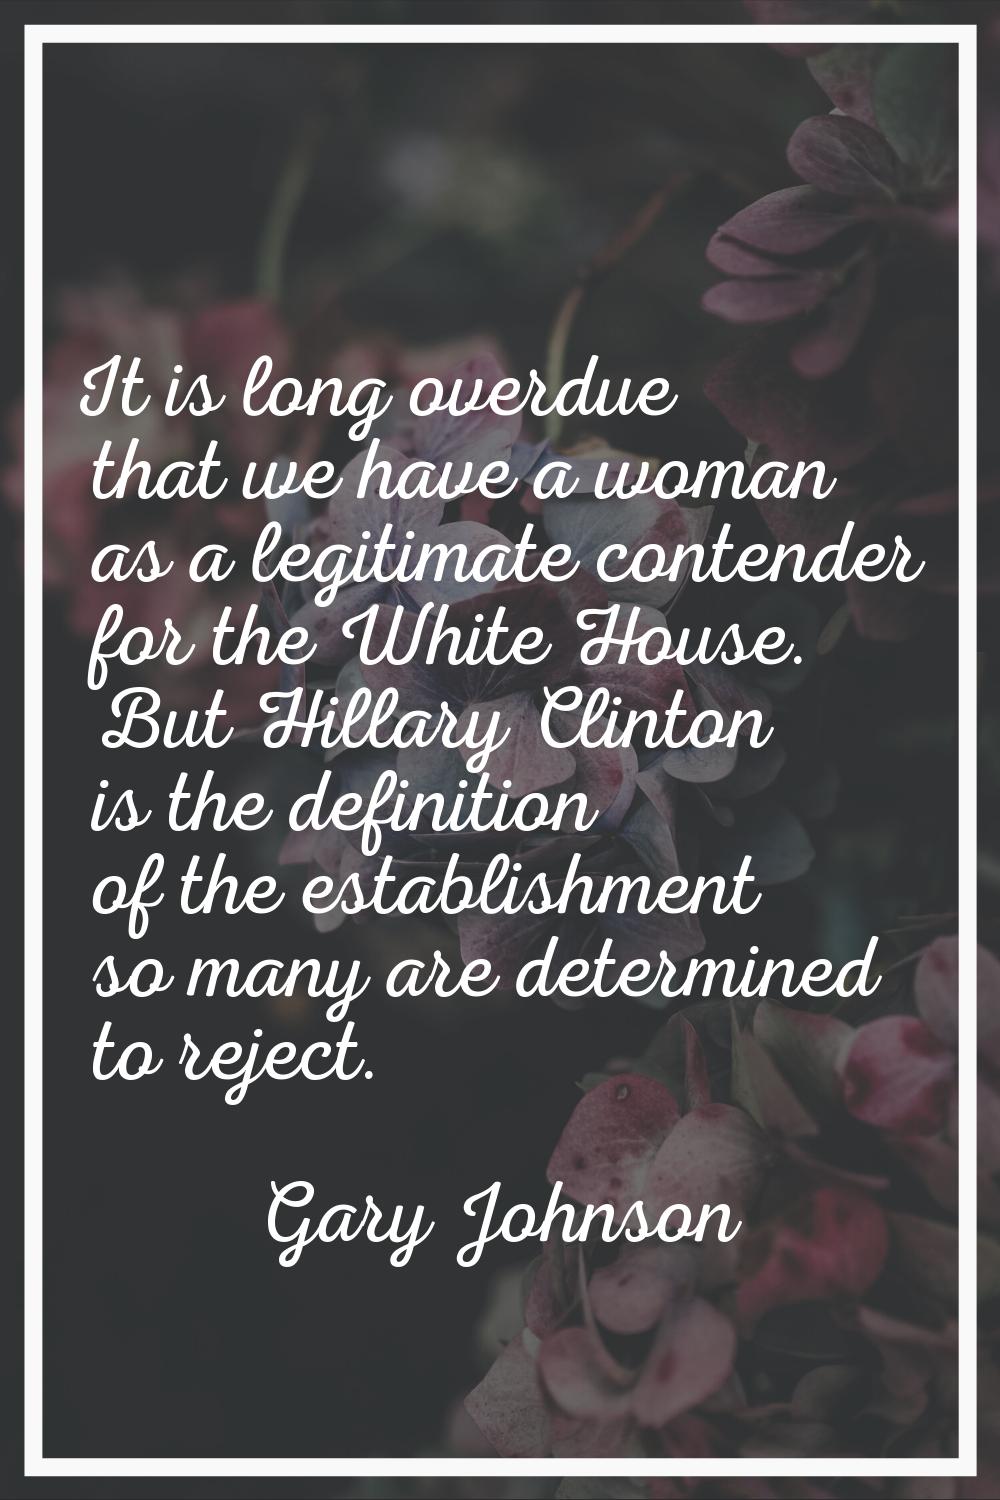 It is long overdue that we have a woman as a legitimate contender for the White House. But Hillary 